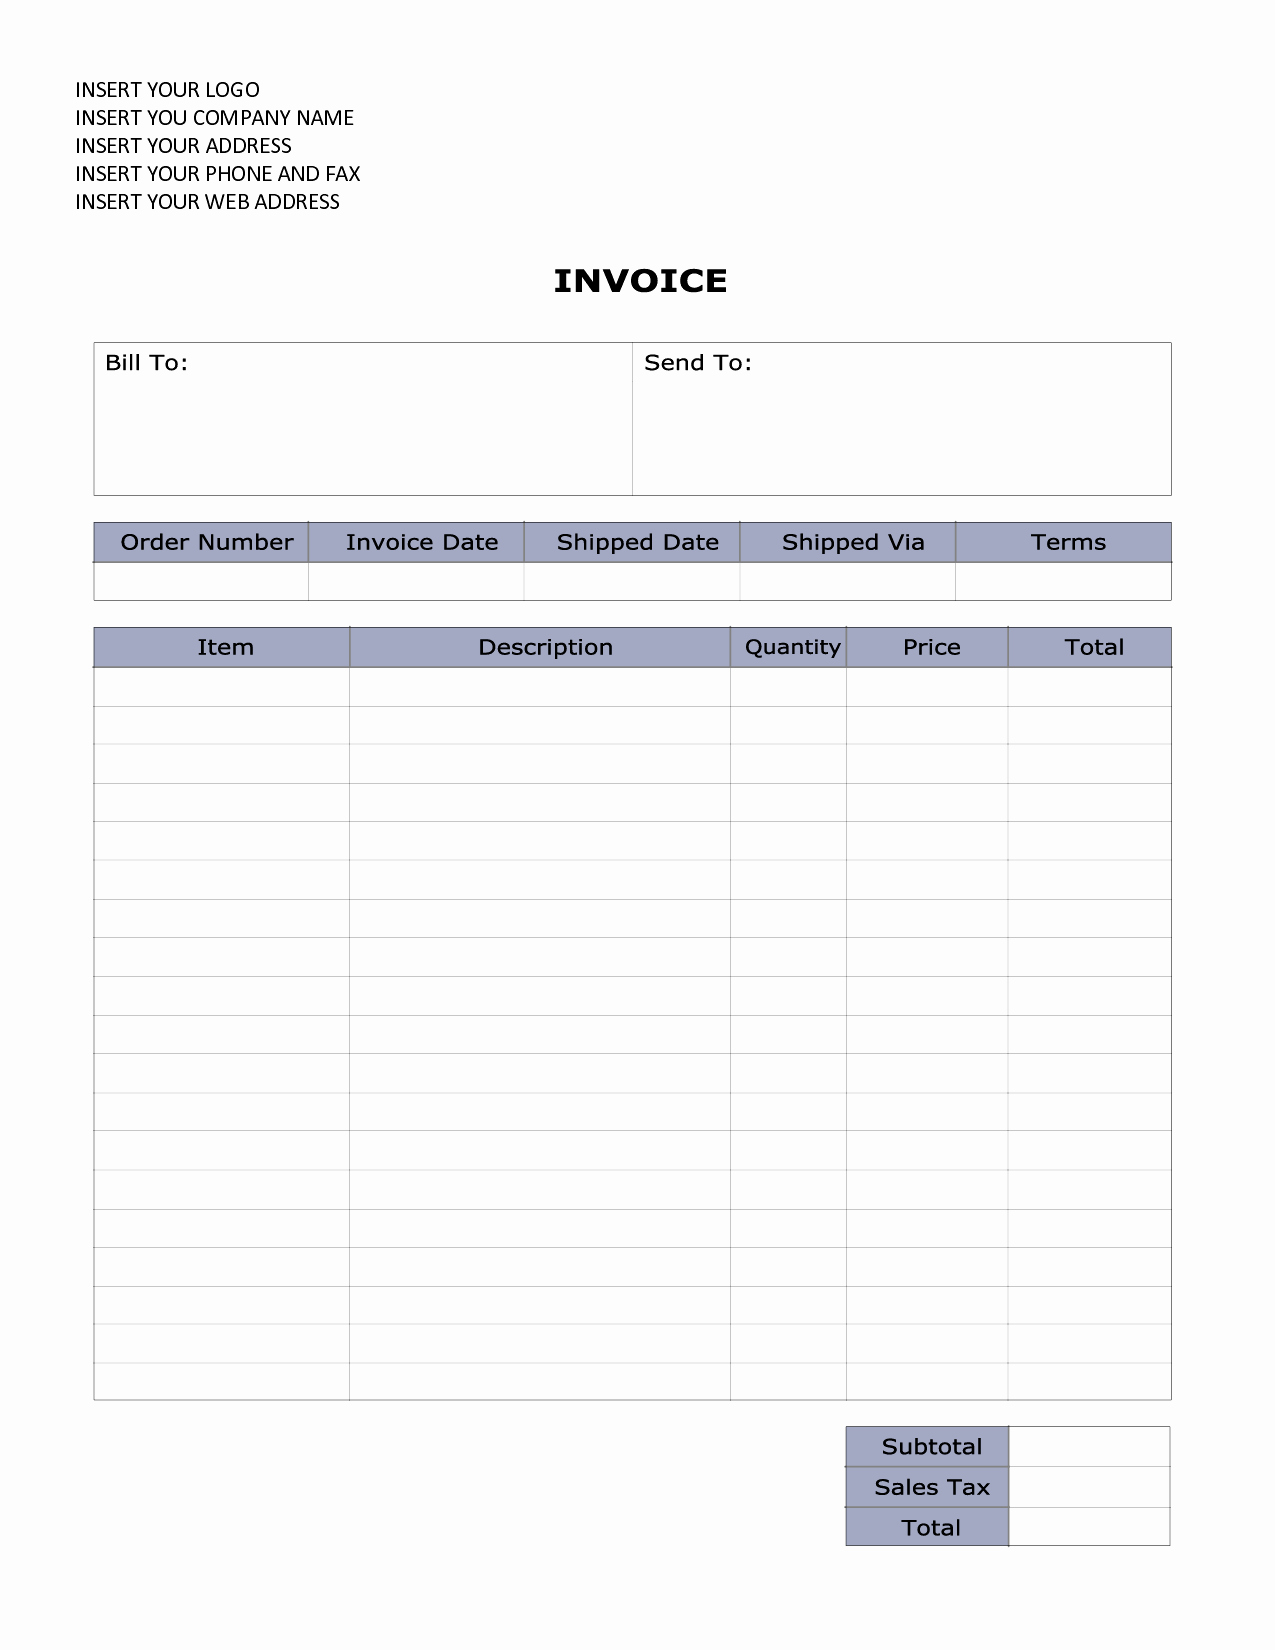 Invoice Template for Microsoft Word Luxury Blank Invoice Template for Microsoft Word